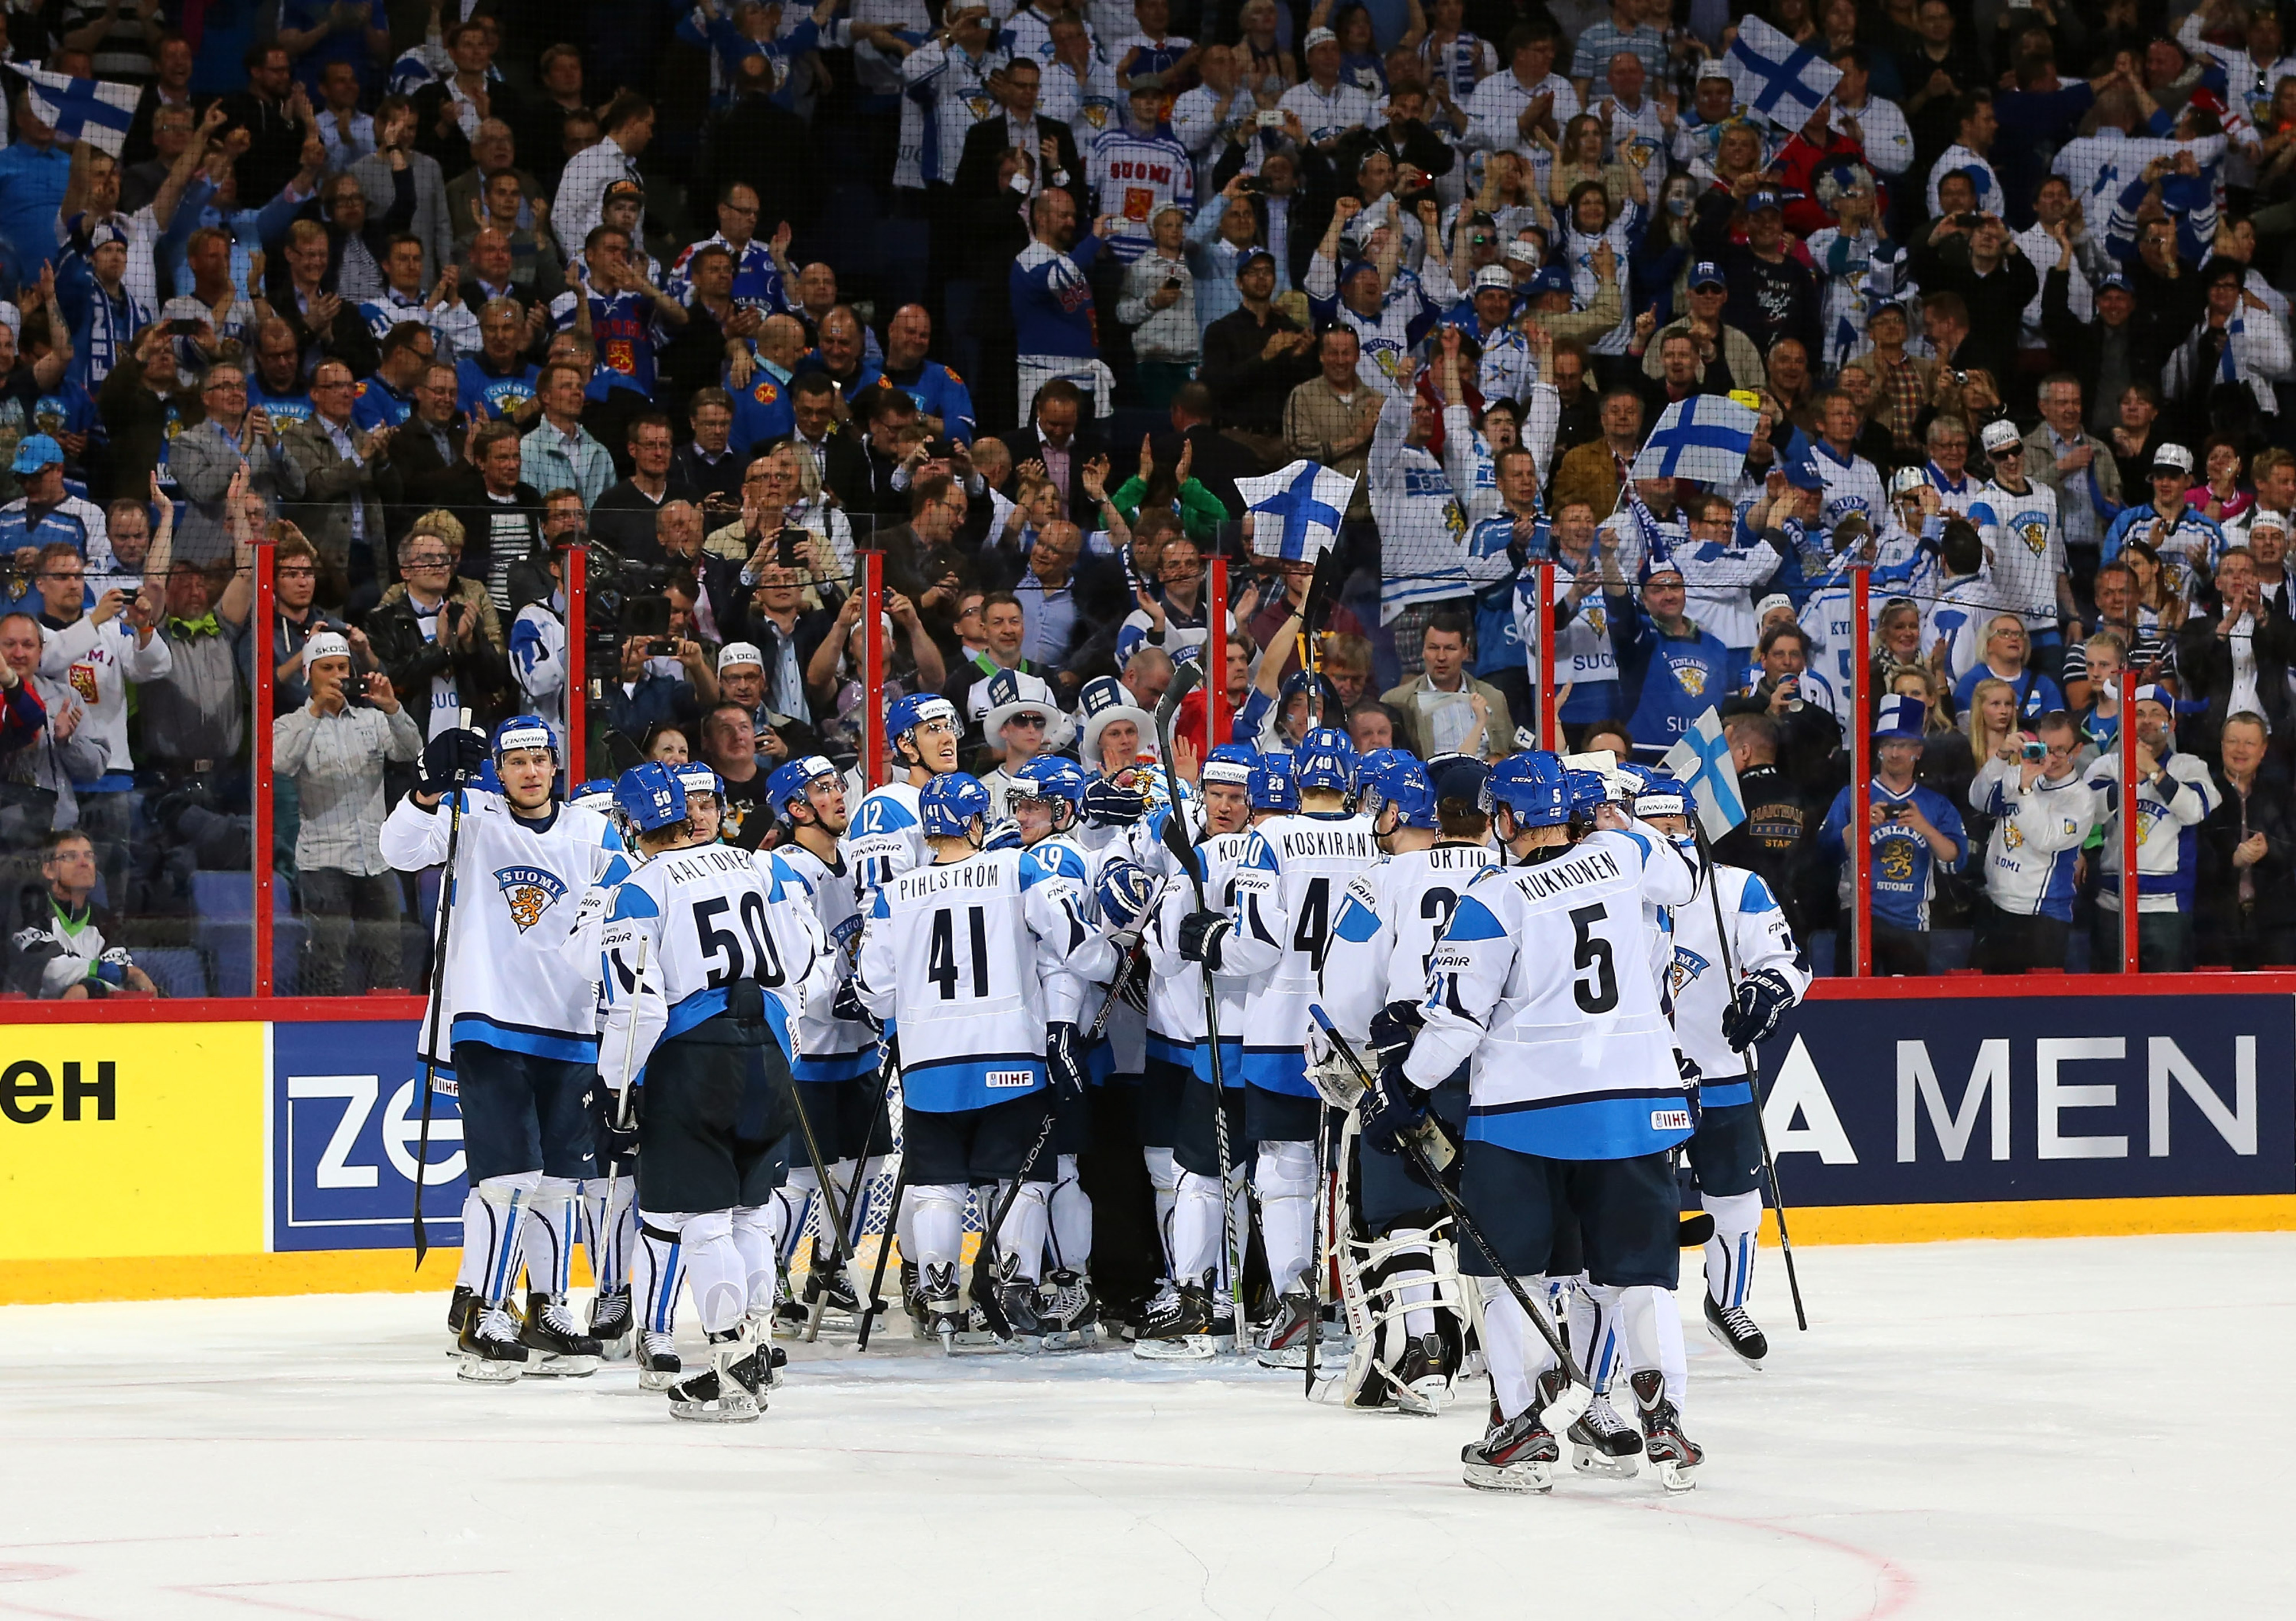 Finland celebrates a win over Slovakia in the 2013 IIHF World Championships Quarterfinal.